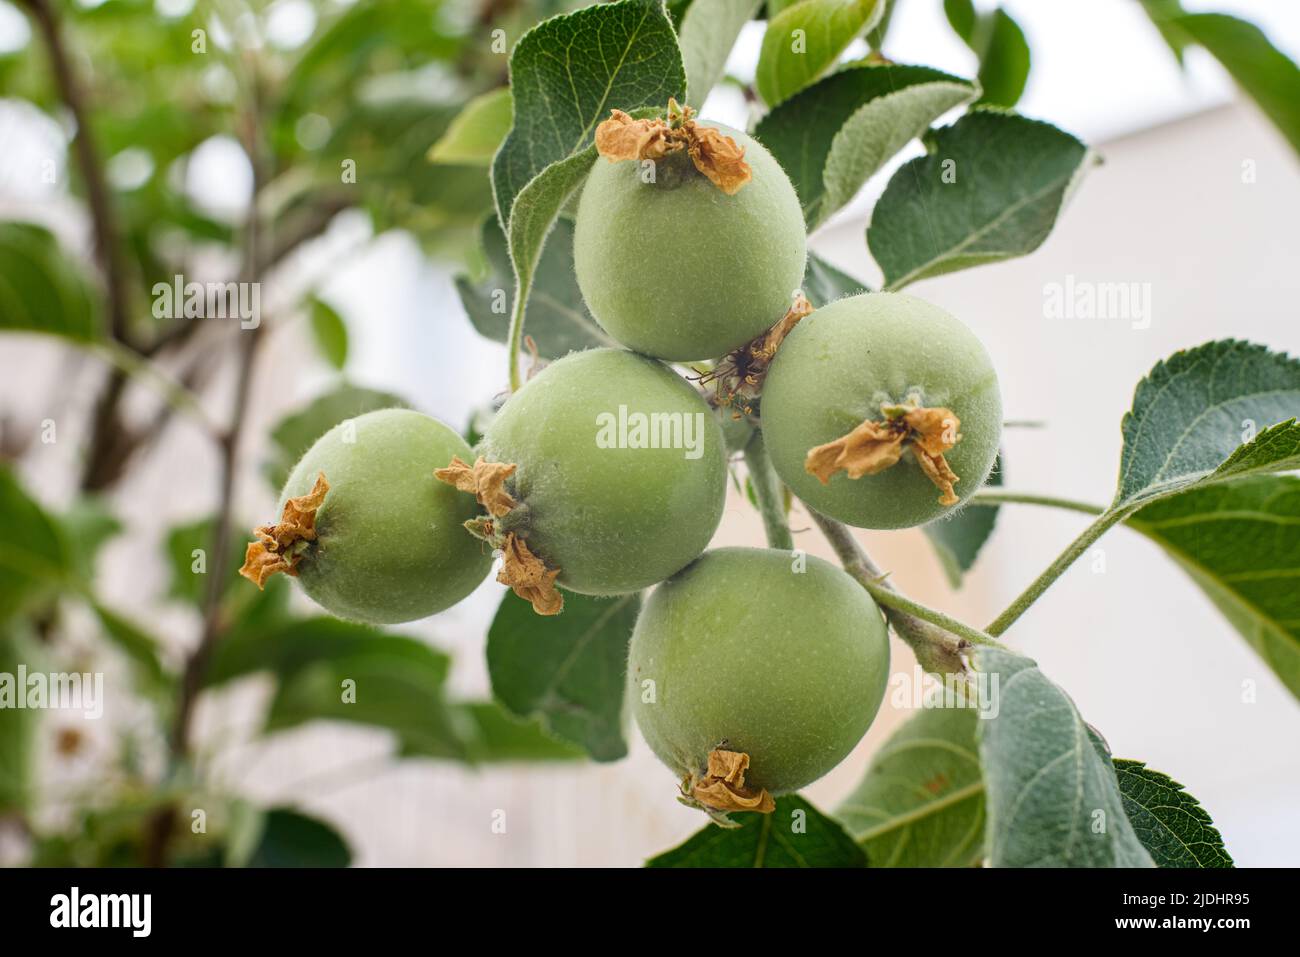 Apple buds, still green fruit growing on the tree. Stock Photo